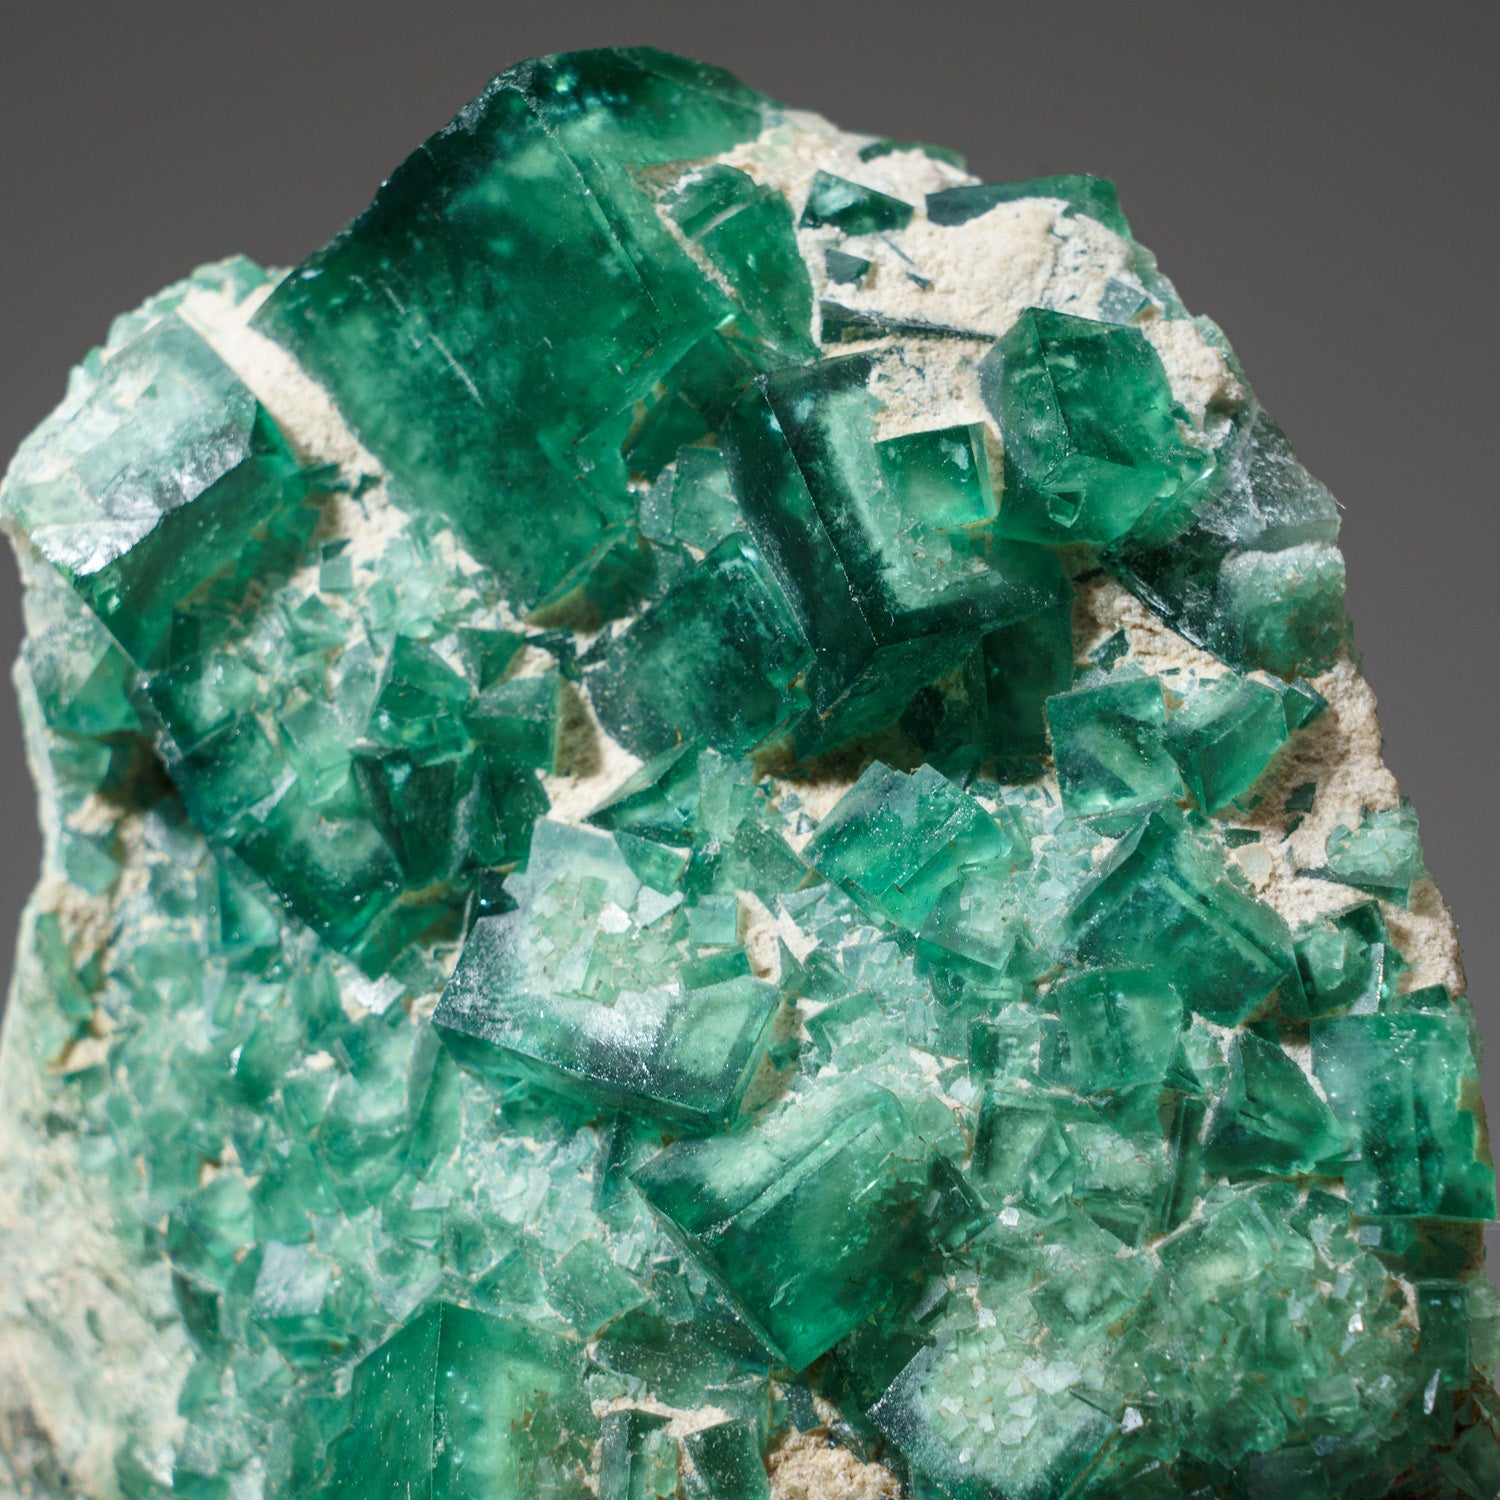 Genuine Green Fluorite from Namibia (3 lbs)